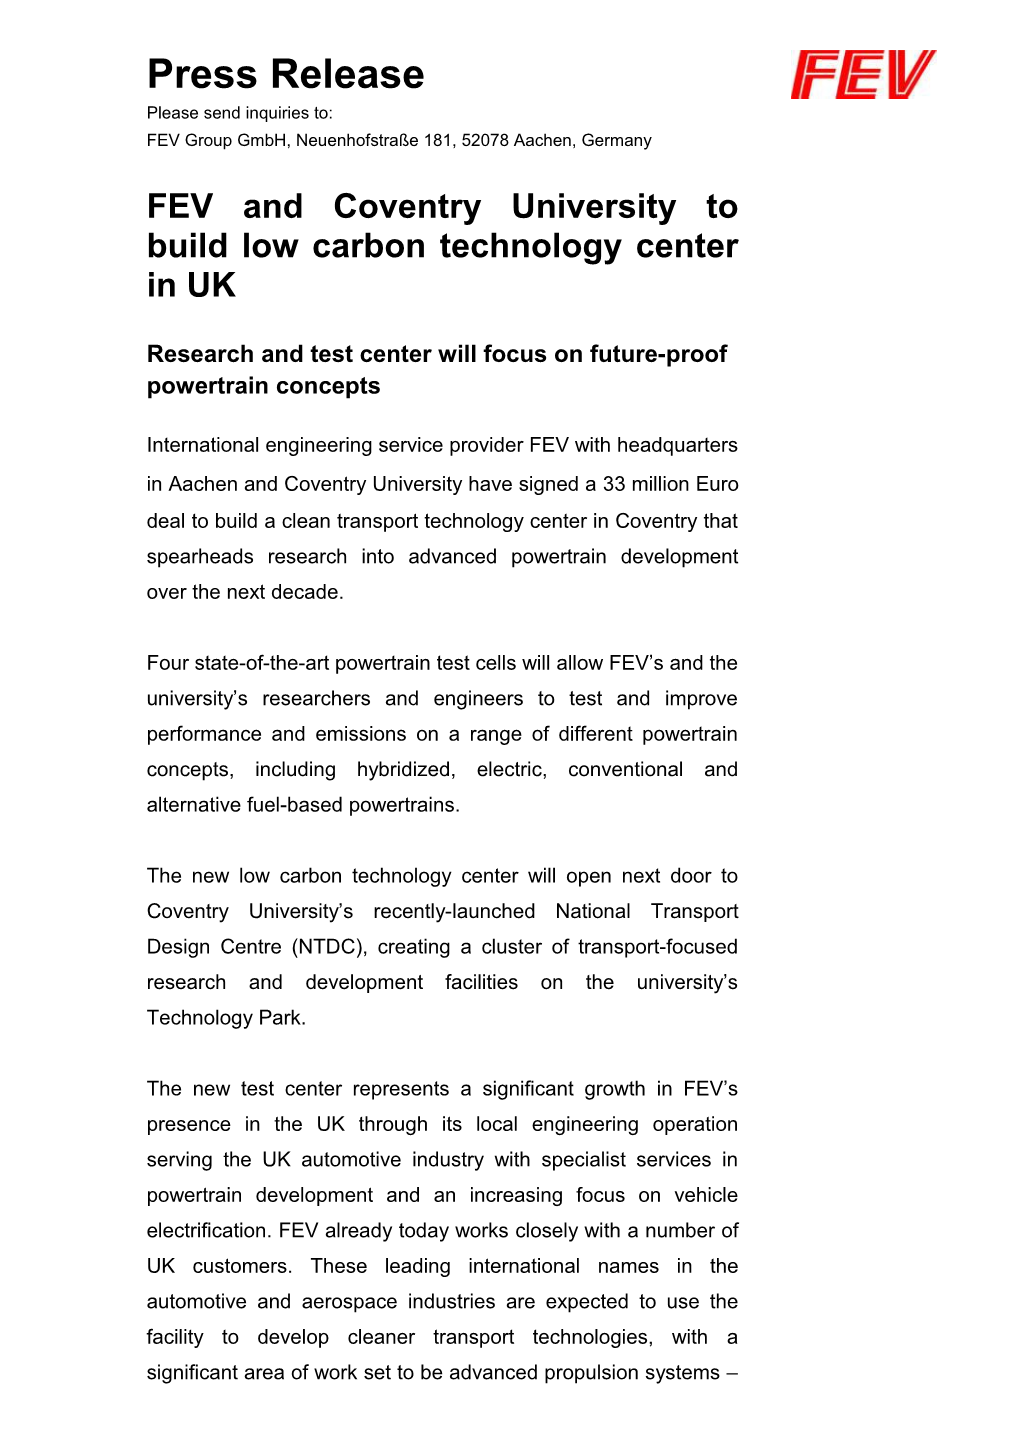 FEV and Coventry University to Build Low Carbon Technology Center in UK